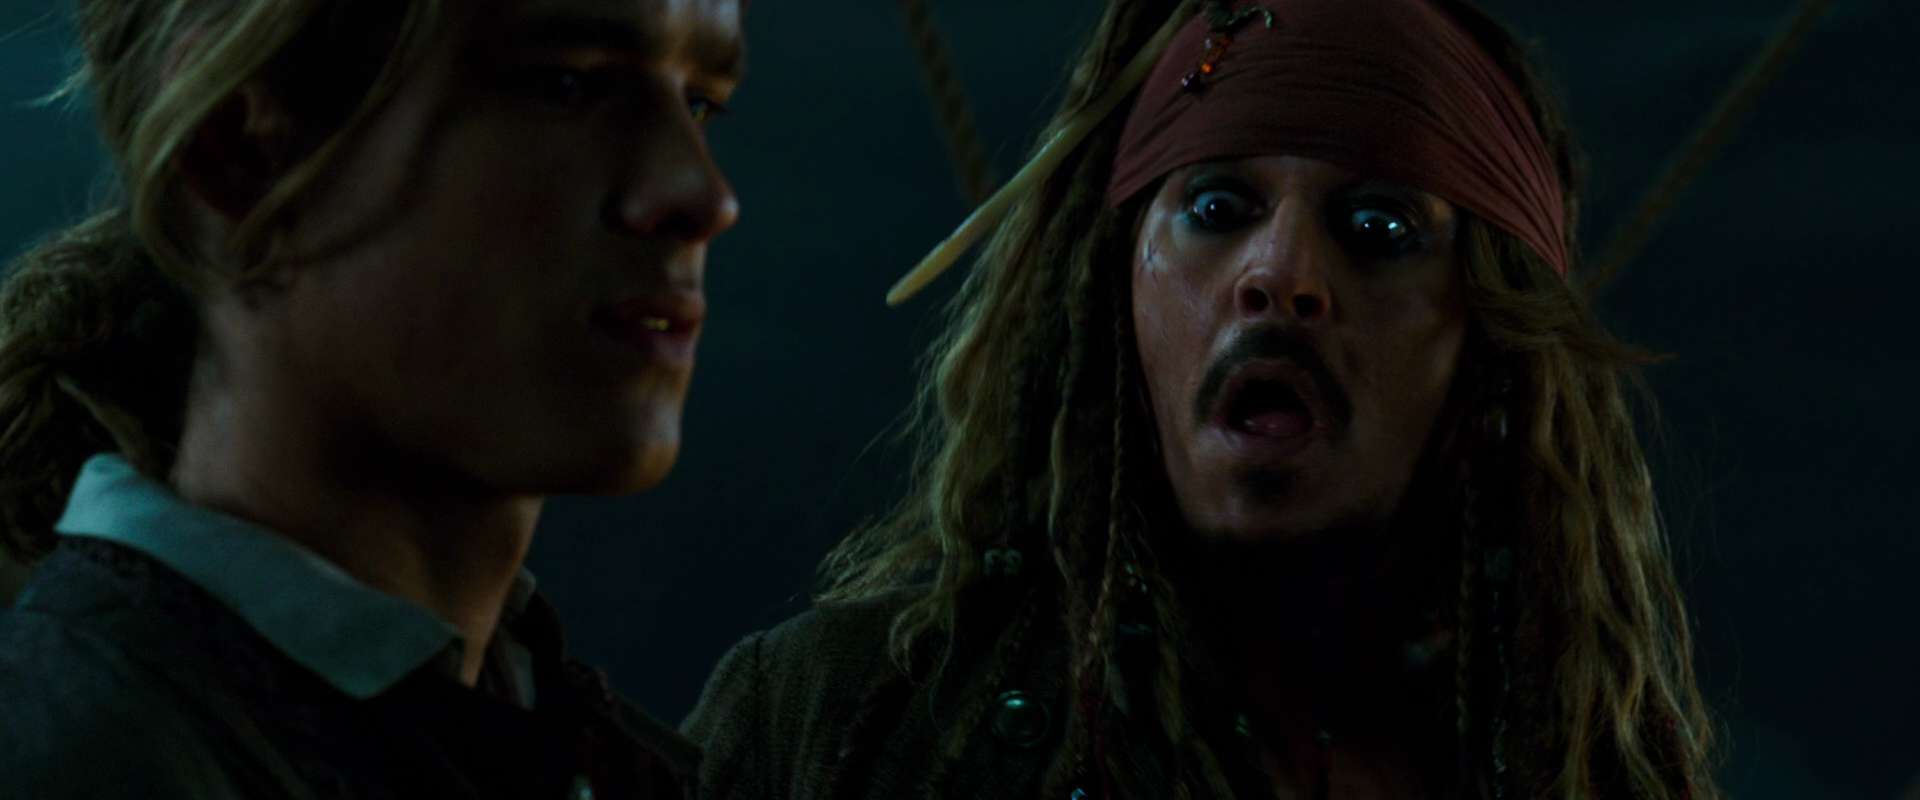 Pirates of the caribbean 2 in hindi watch online